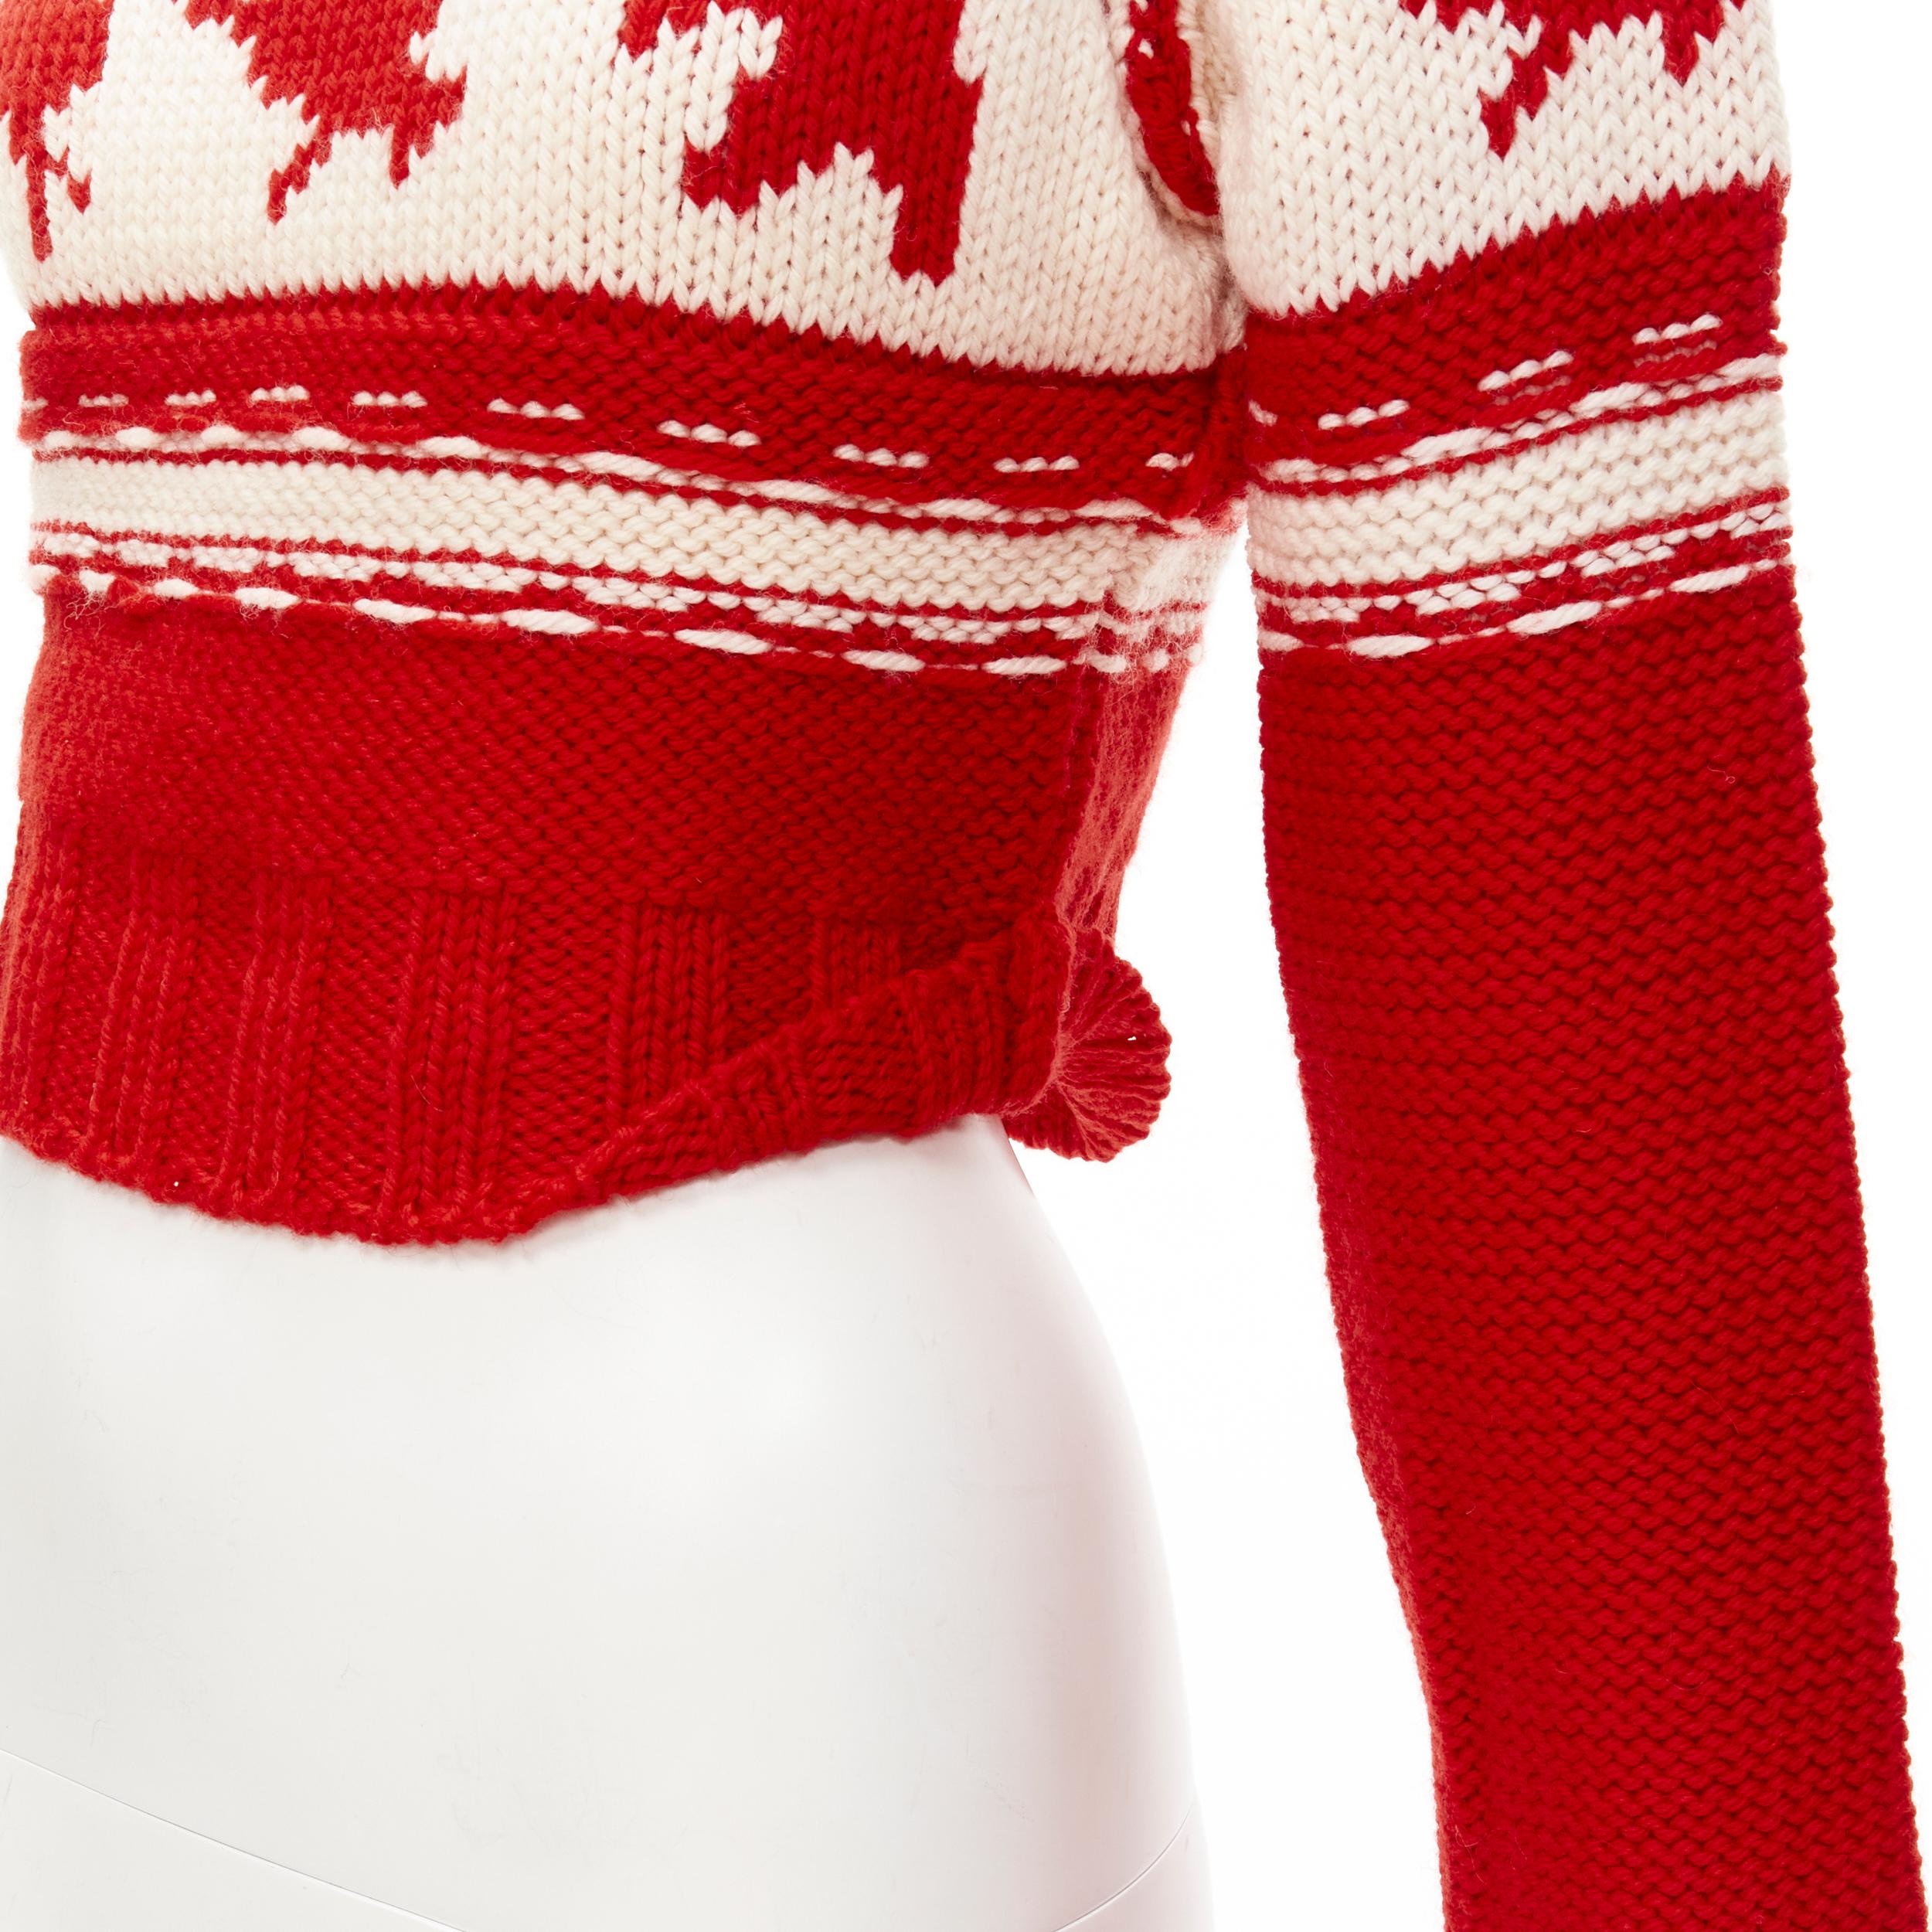 DSQUARED Vintage red white Canadian Christmas cropped turtleneck sweater S
Brand: Dsquared2
Material: Feels like wool
Color: Red
Pattern: Abstract
Extra Detail: Turtleneck collar. Raglan sleeves. Cropped fit.

CONDITION:
Condition: Excellent, this